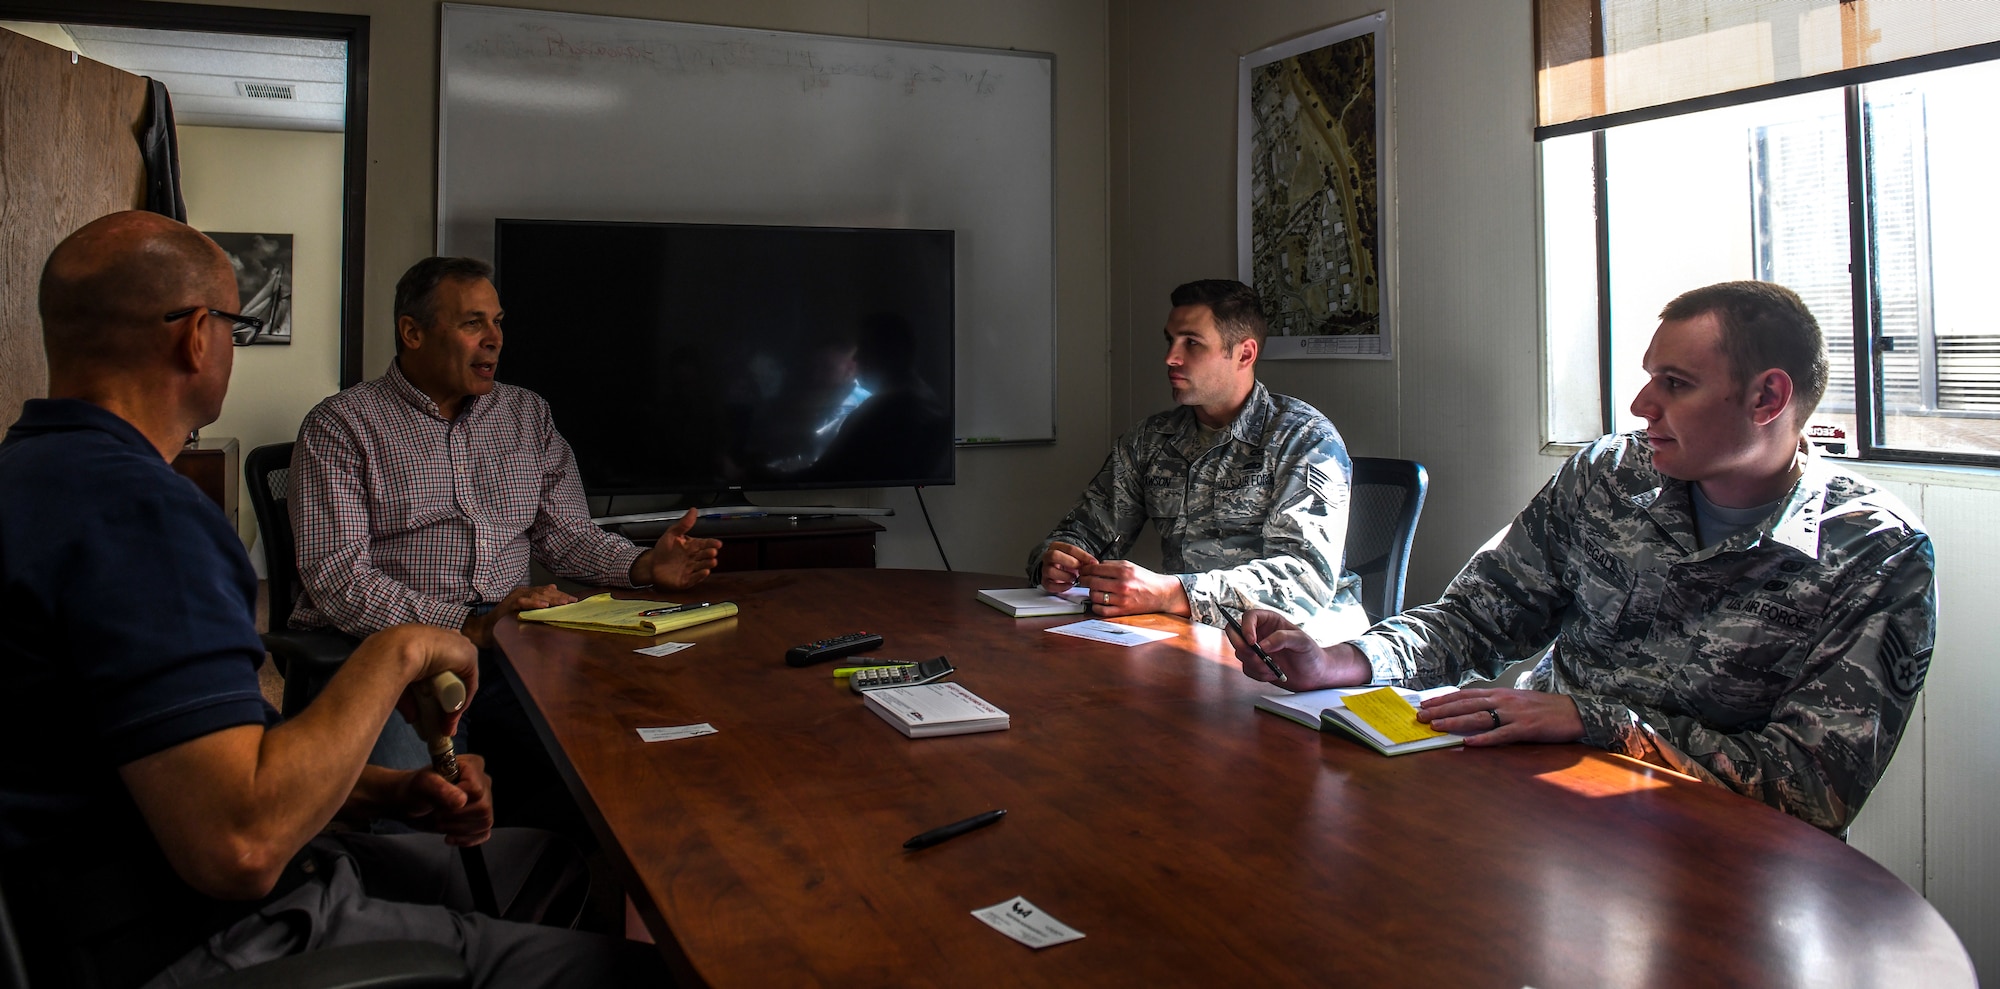 Members of the 9th Reconnaissance Wing safety office meet and talk with Lloyd Burns, Western Aggregates vice president (center), in Marysville, California, Oct. 10, 2019. Meeting with Western Aggregate gave a chance for both groups to work together and figure out a better solution to help Airmen and families. (U.S. Air Force Photo by Senior Airman Colville McFee)